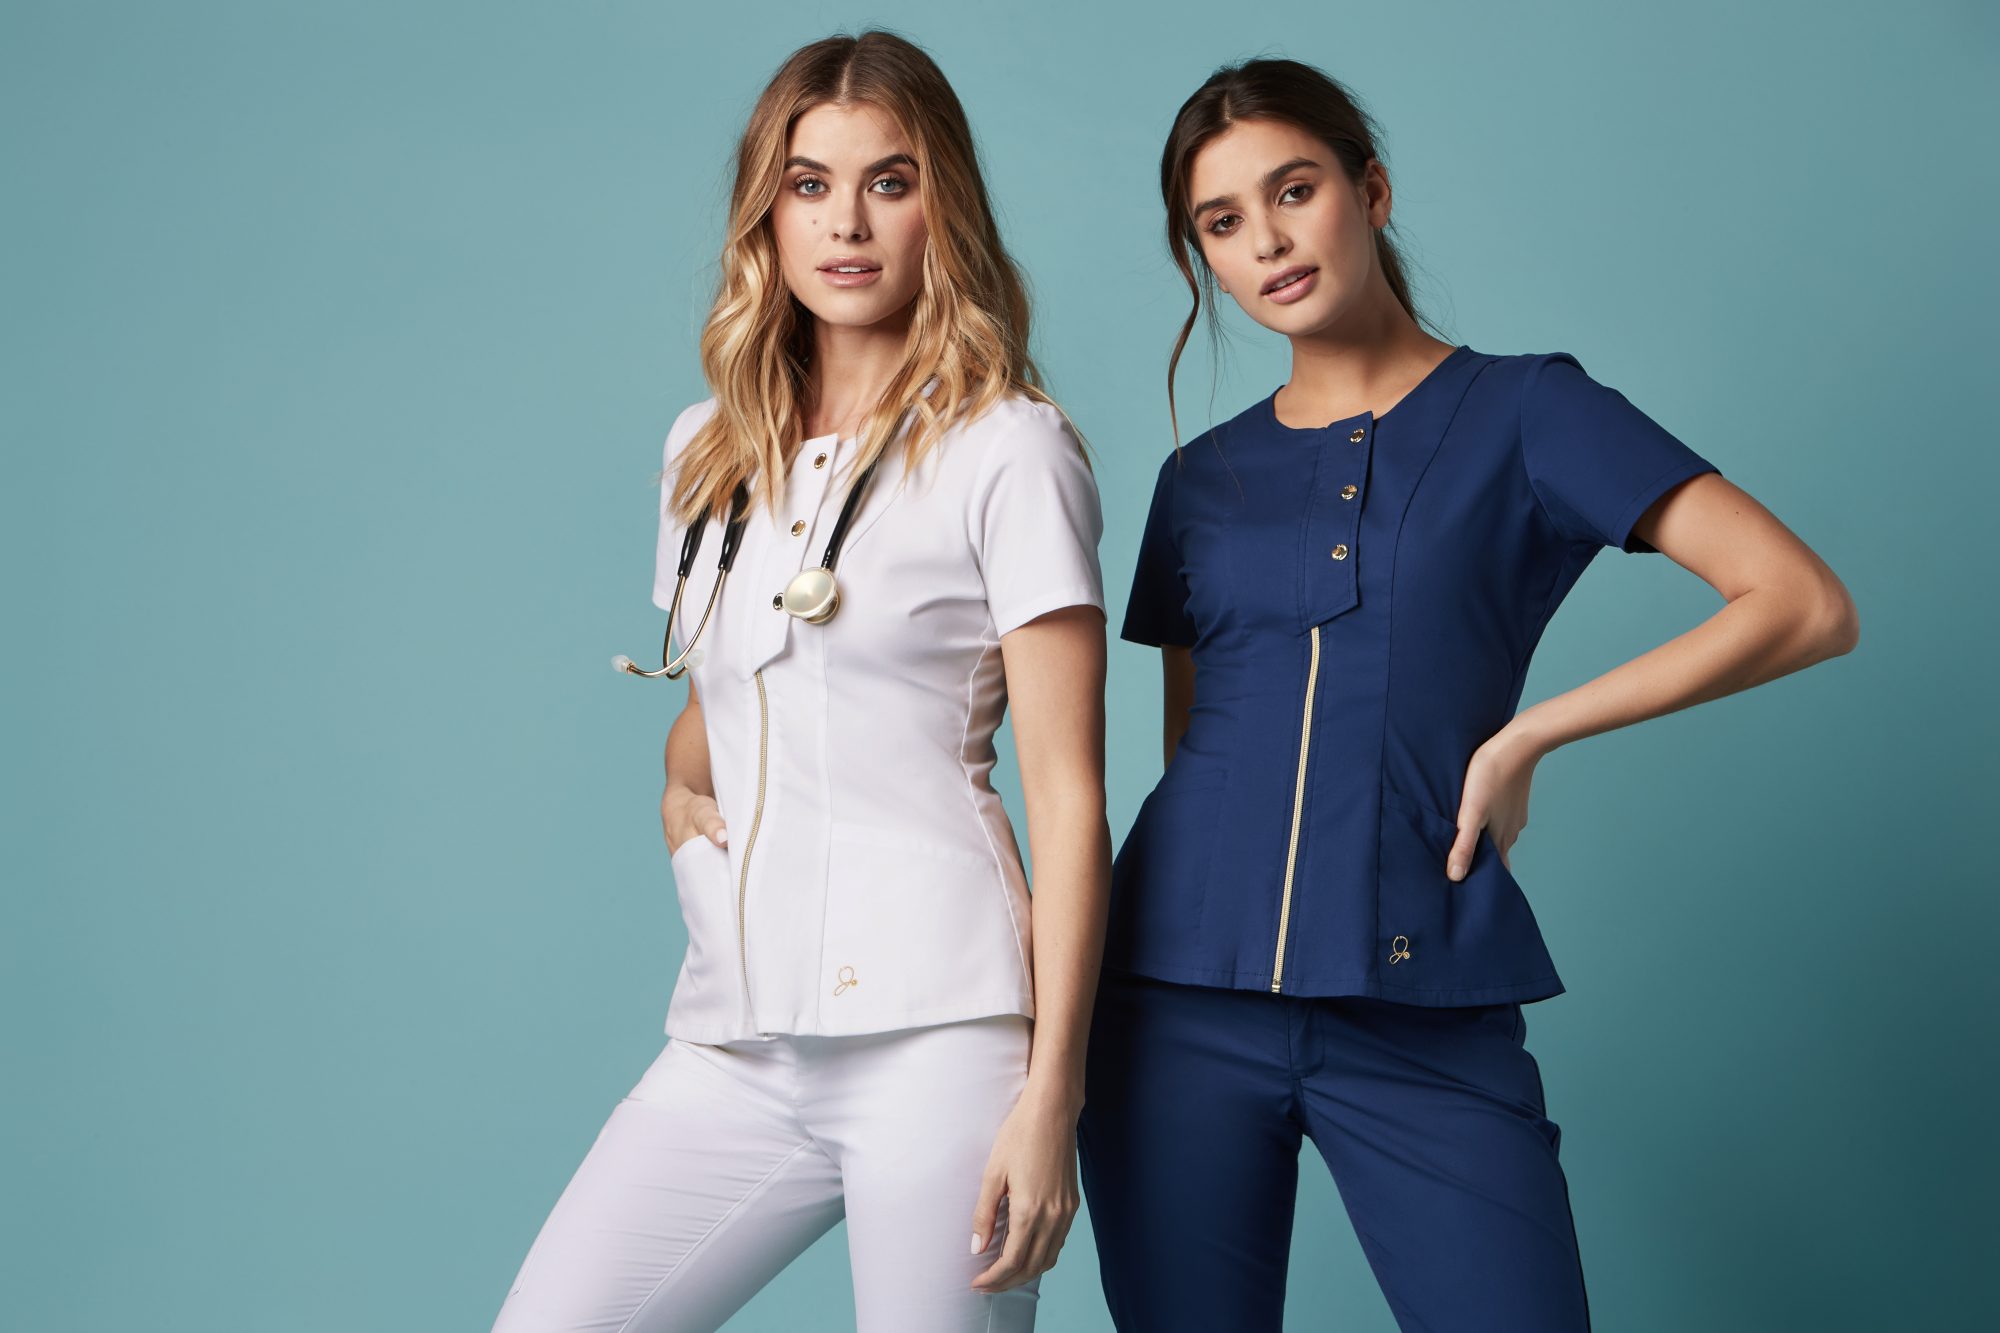 This Company Is Making Stylish Scrubs So Doctors And Nurses Can Express